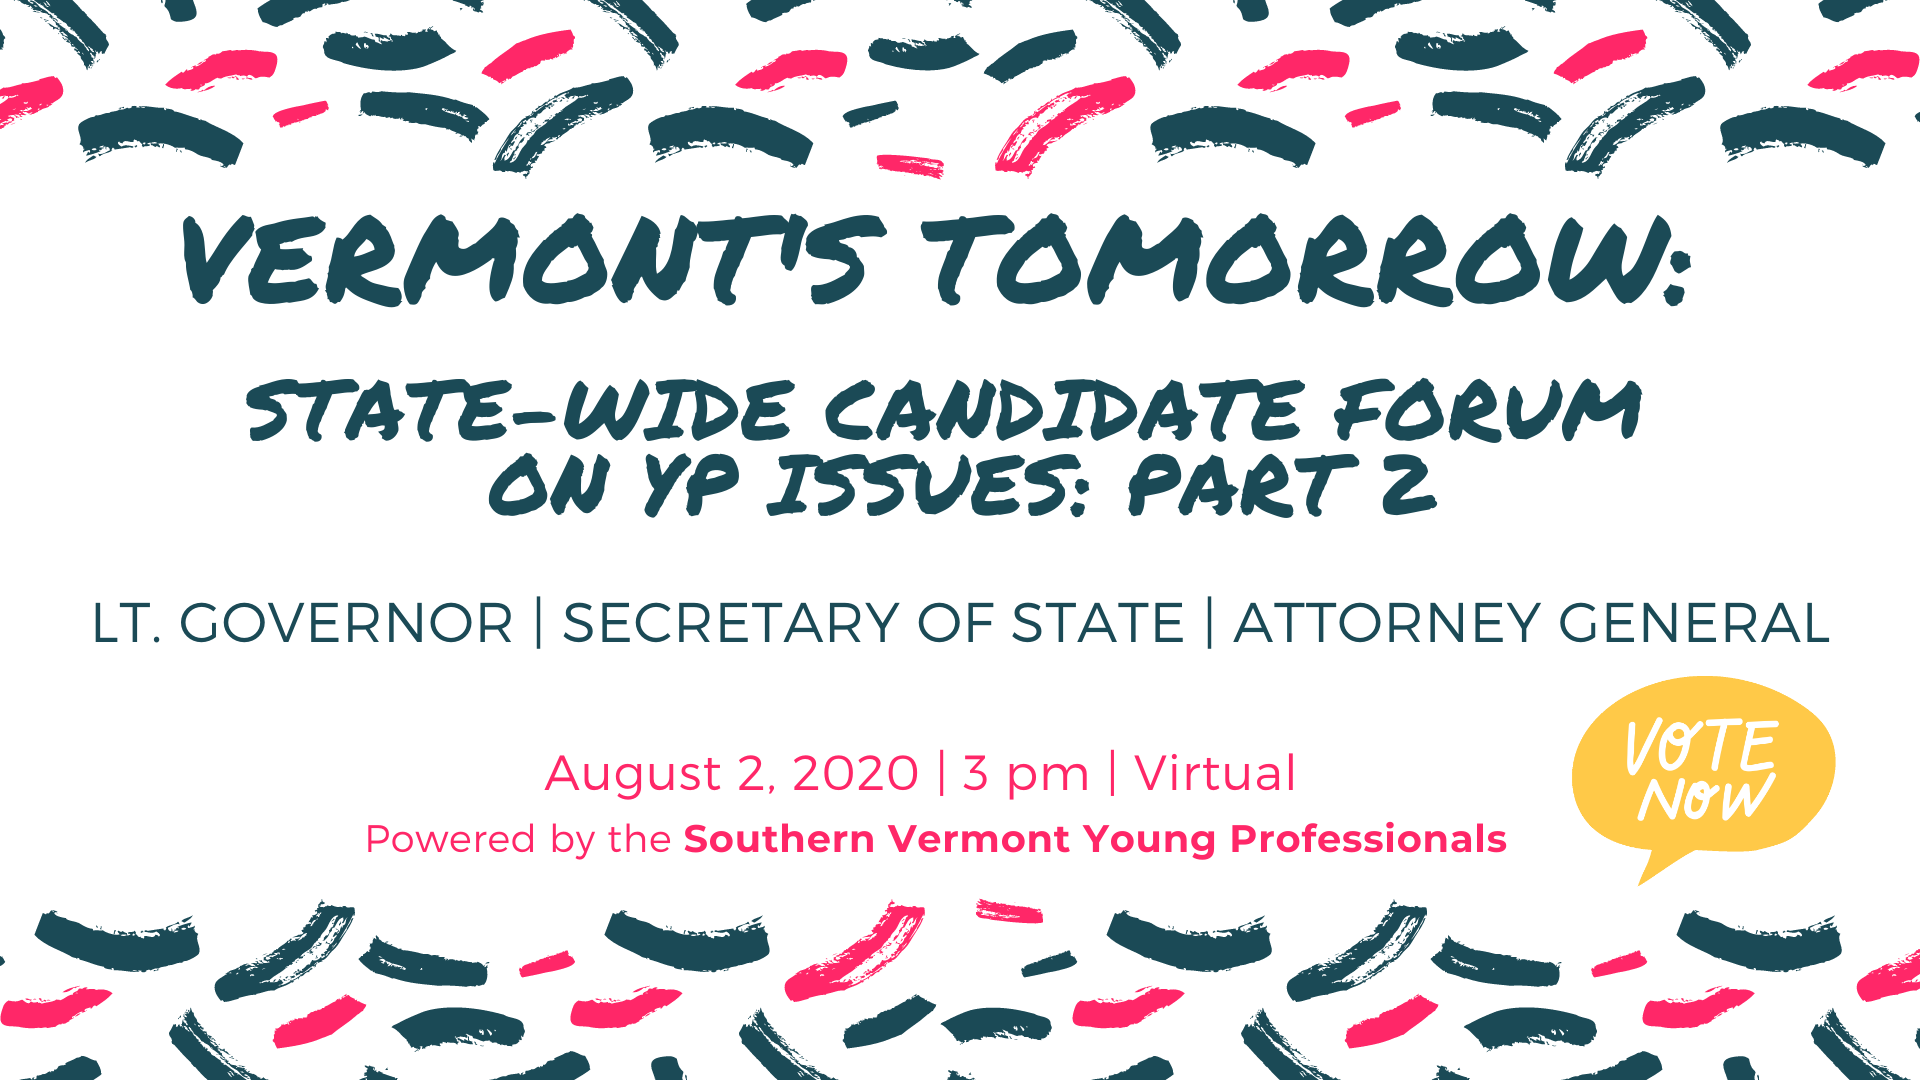 Part 2 Candidate Forum on YP Issues